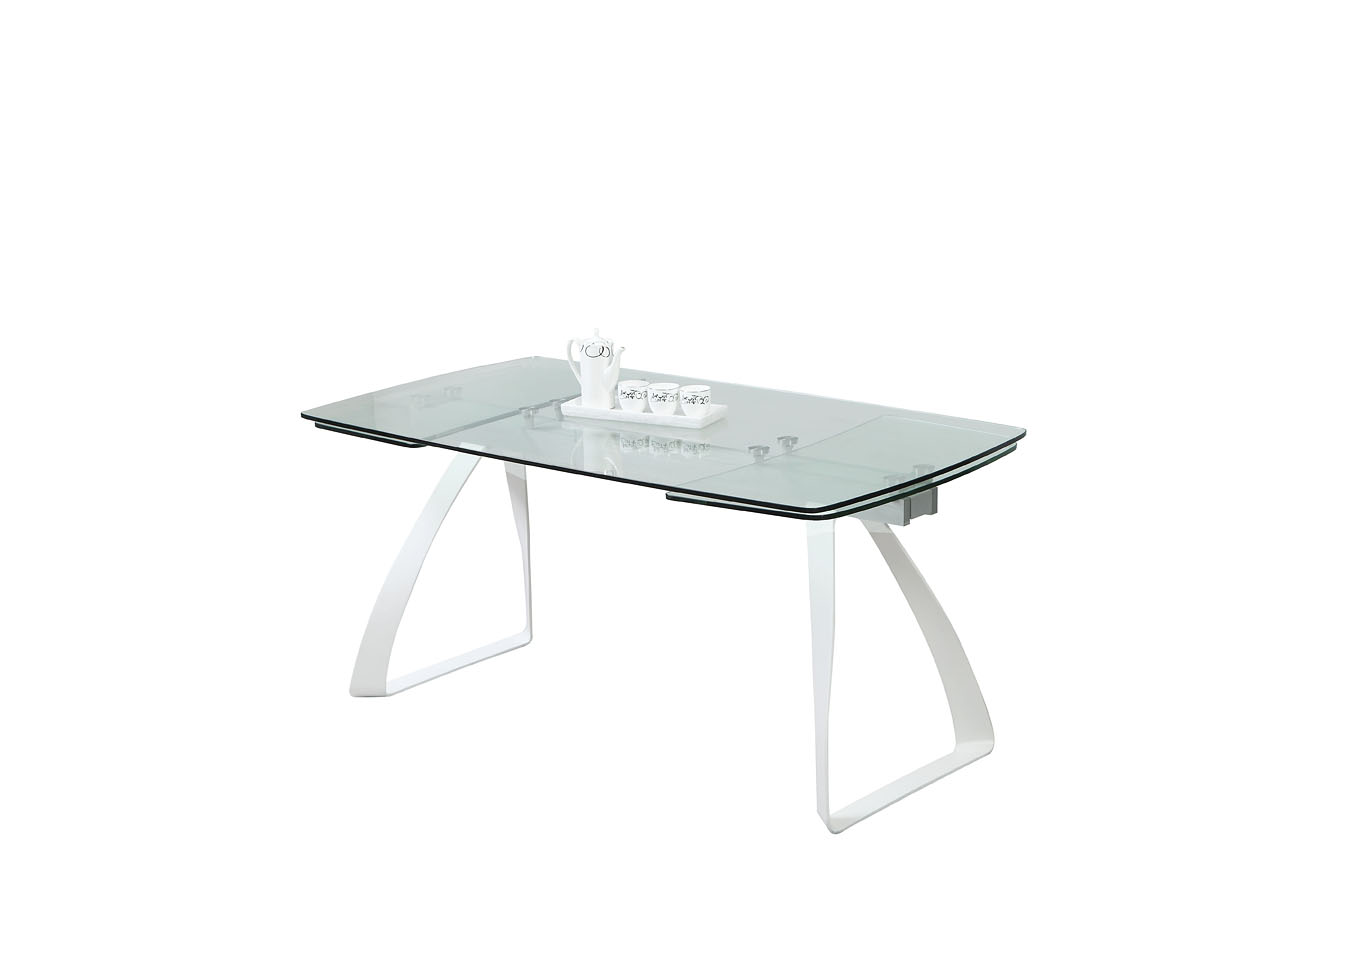 Chloe Matte White Rectangular Glass Top Dining Table,Chintaly Imports